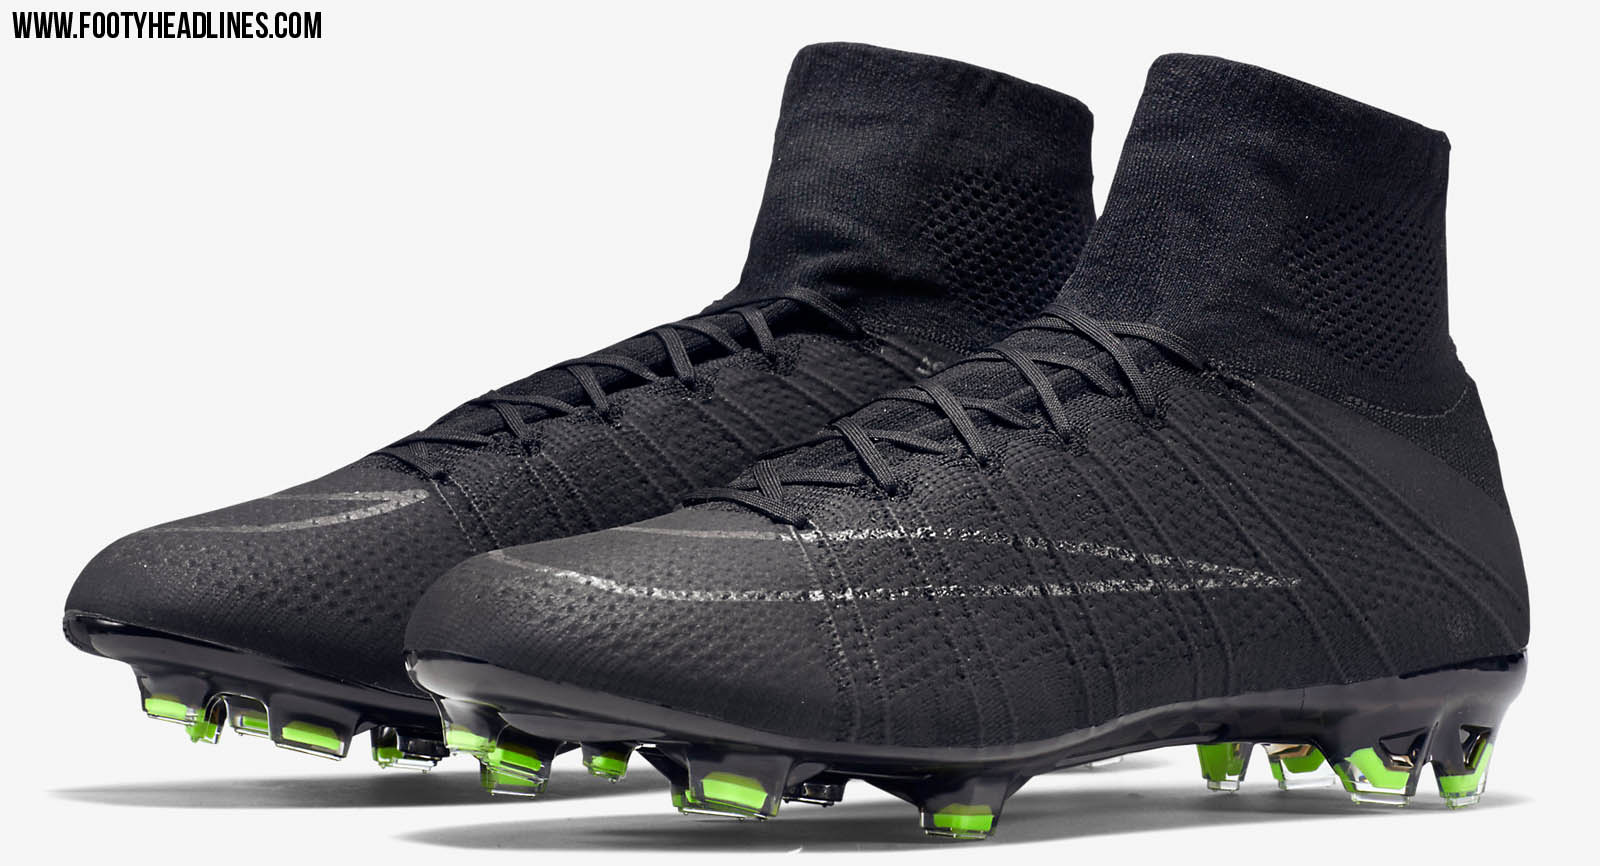 Mercurial Superfly 2015 Boots Released - Footy Headlines